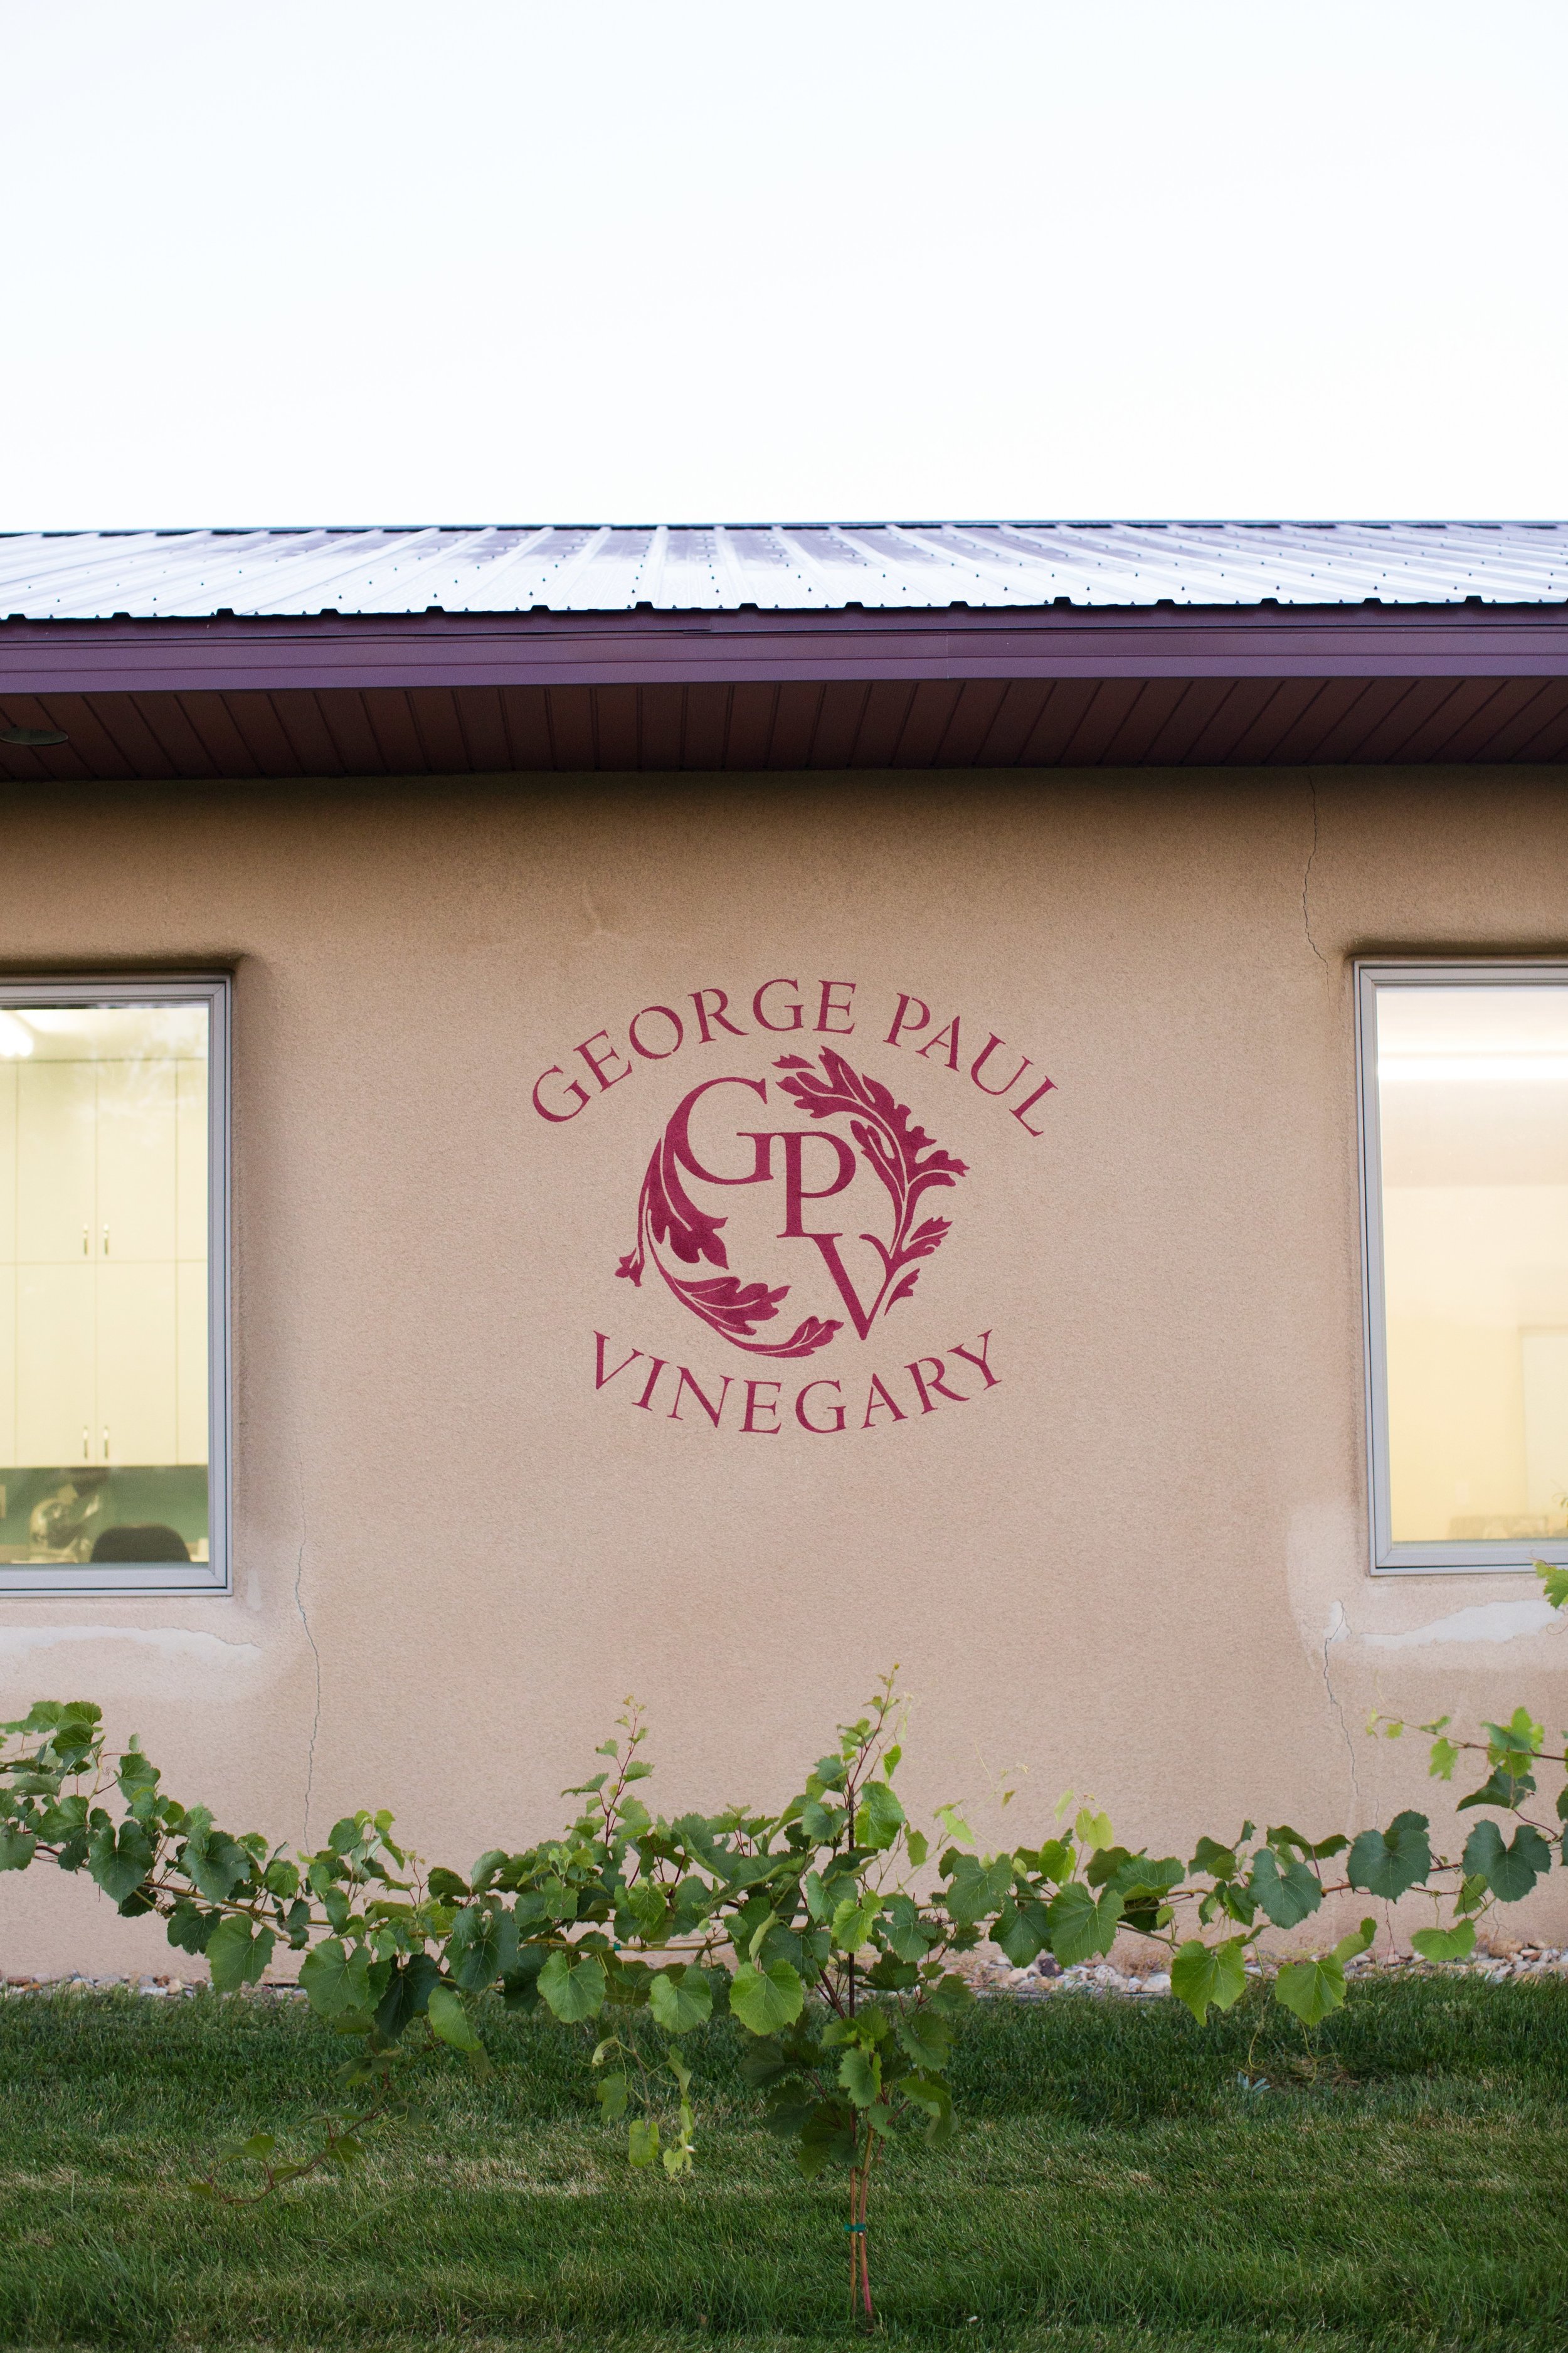 GPV logo painted on the stucco